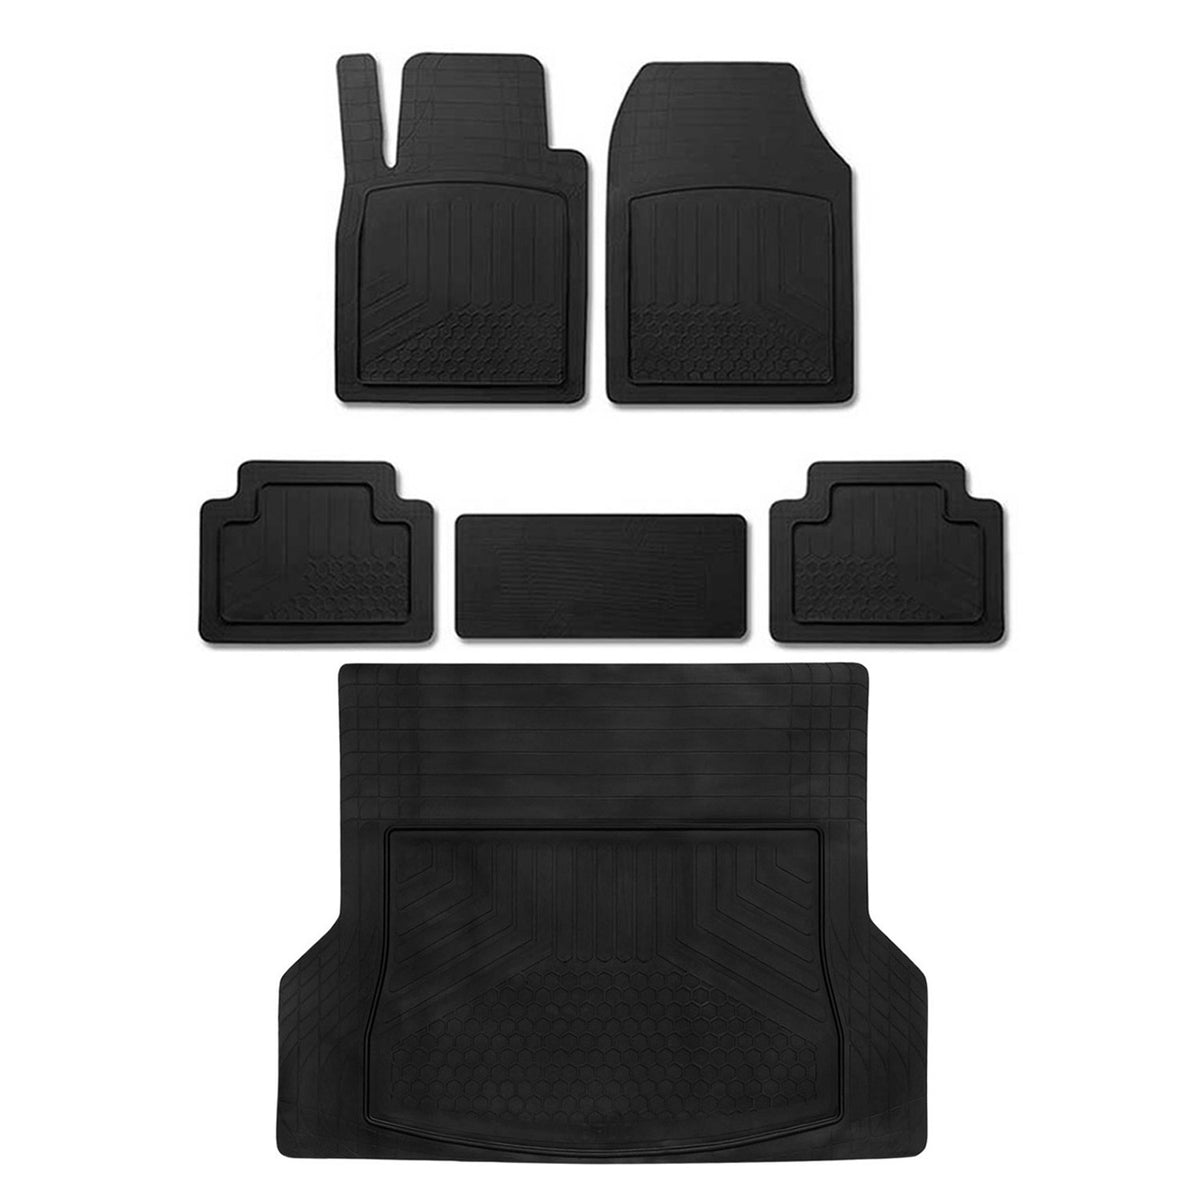 Floor mats & trunk liner set for BMW X3 anti-slip all-weather rubber black 6x